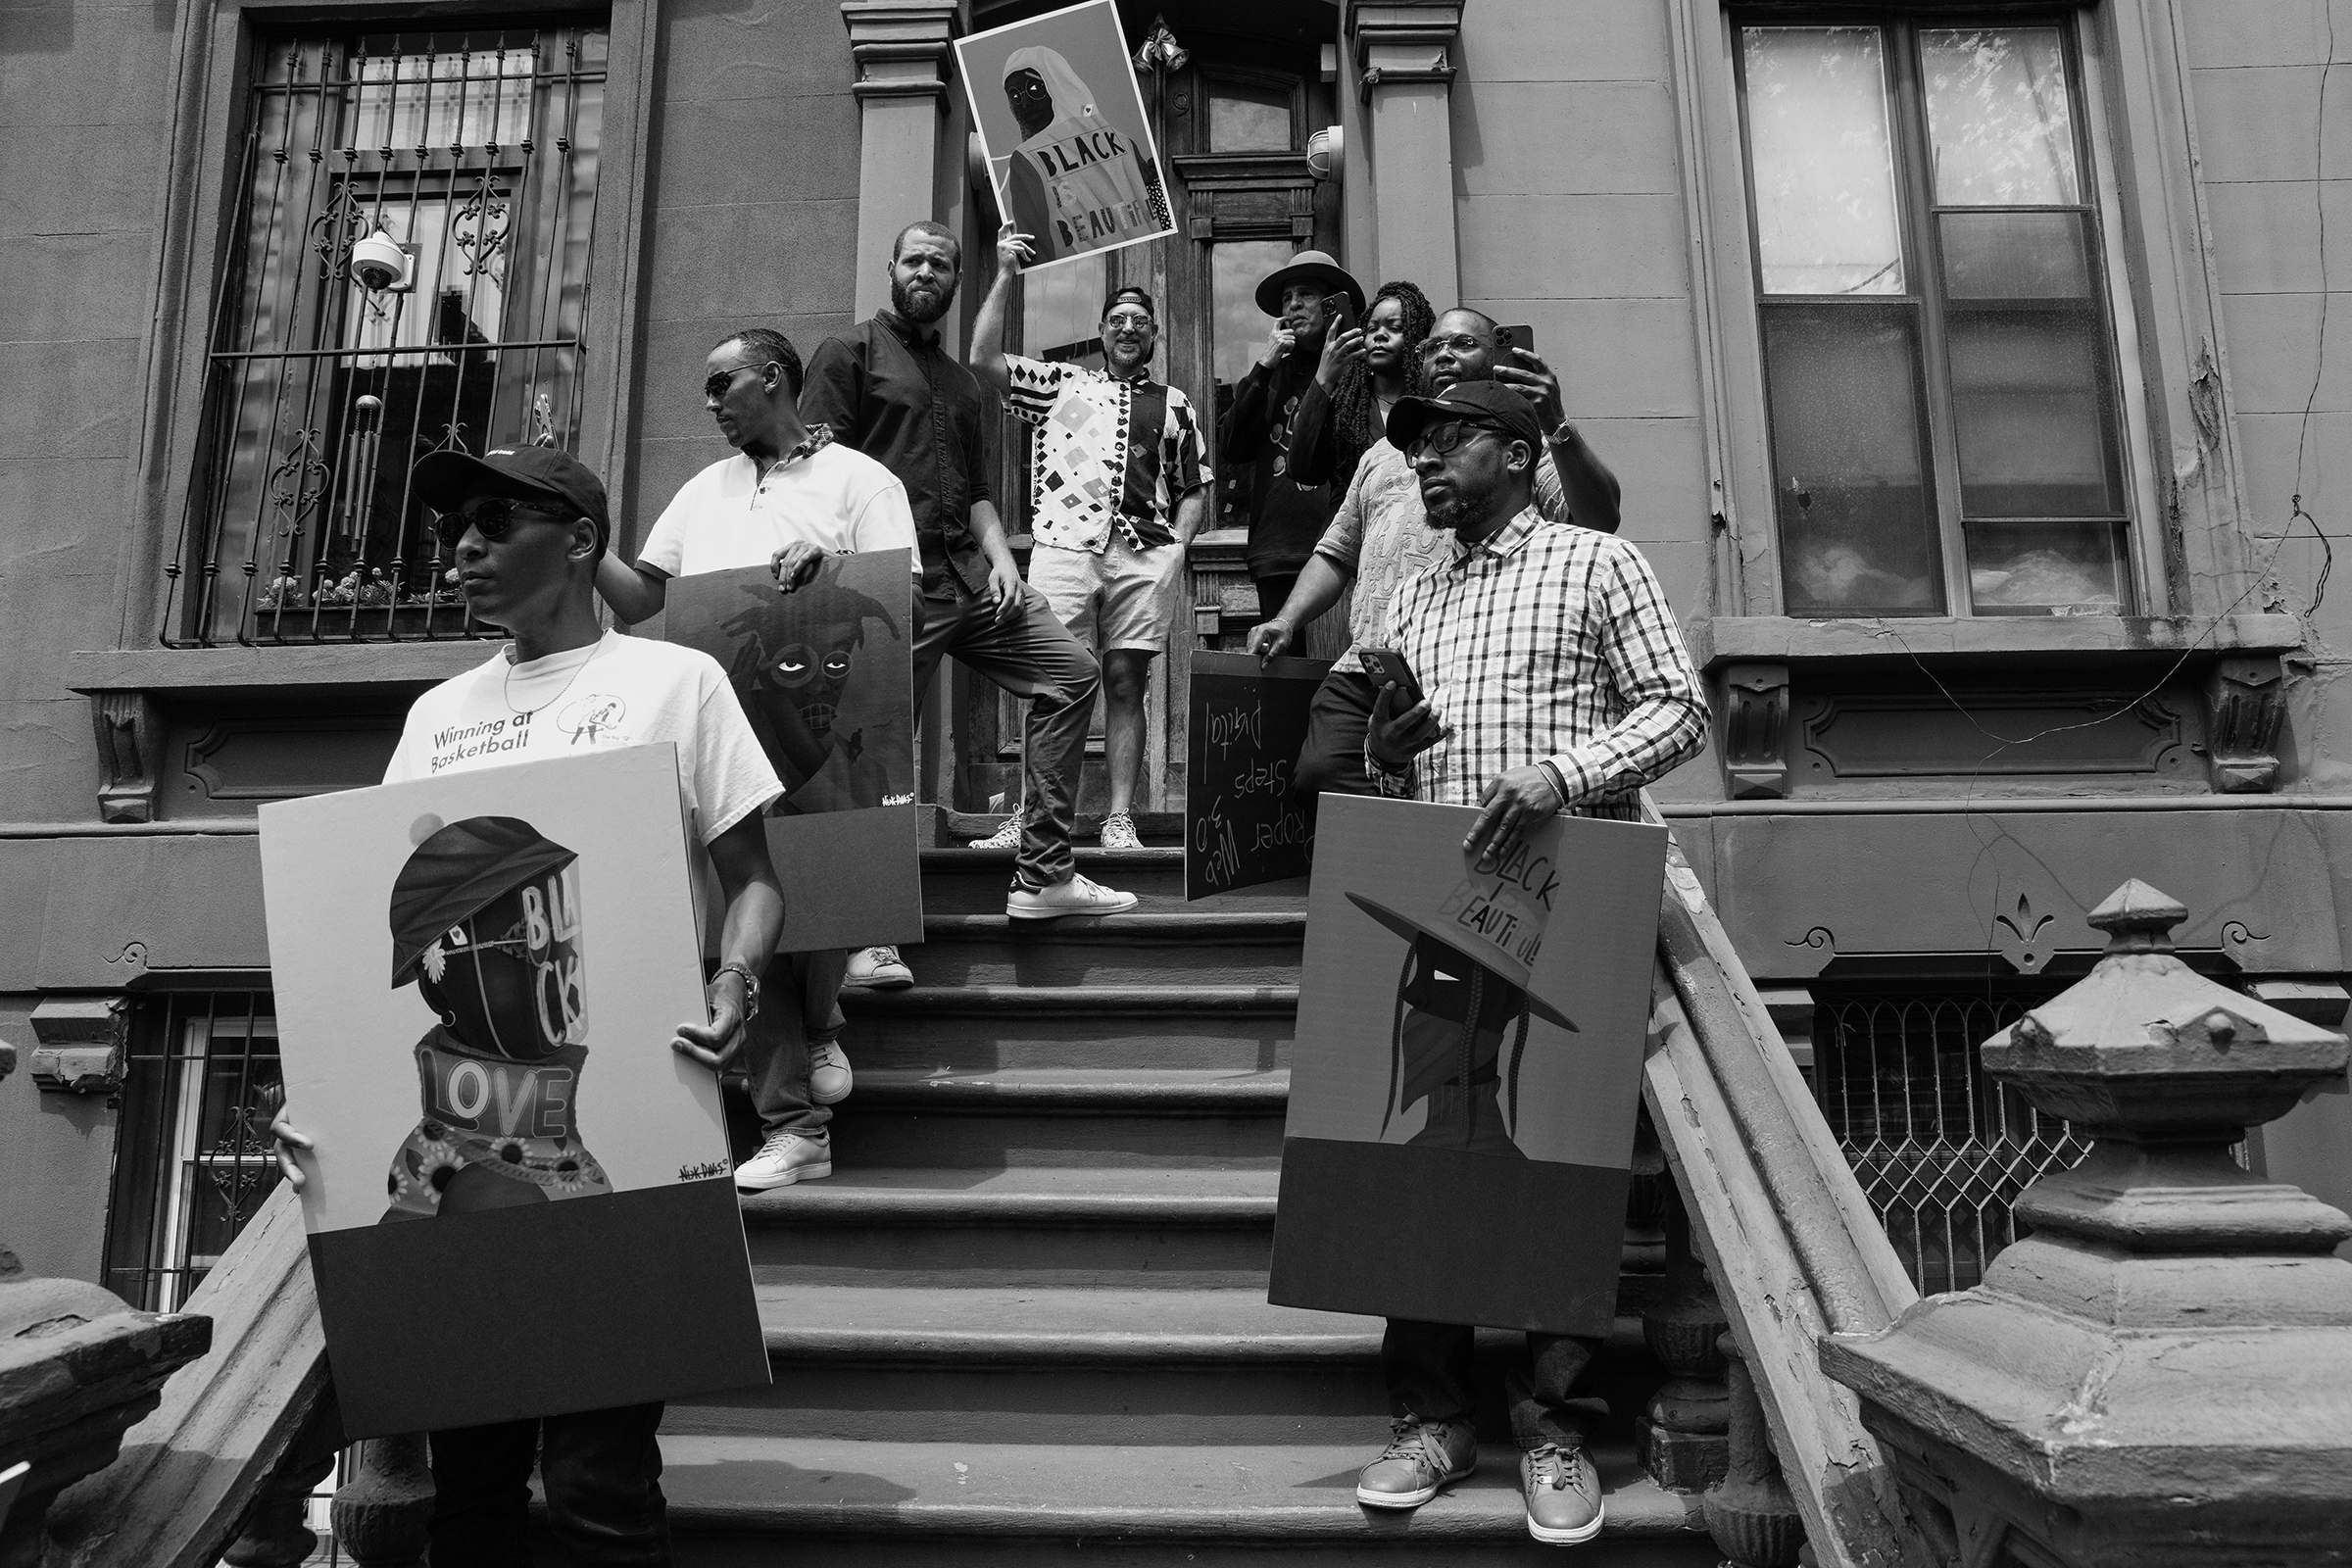 Several Black arts showcase their work from the Harlem stoop.